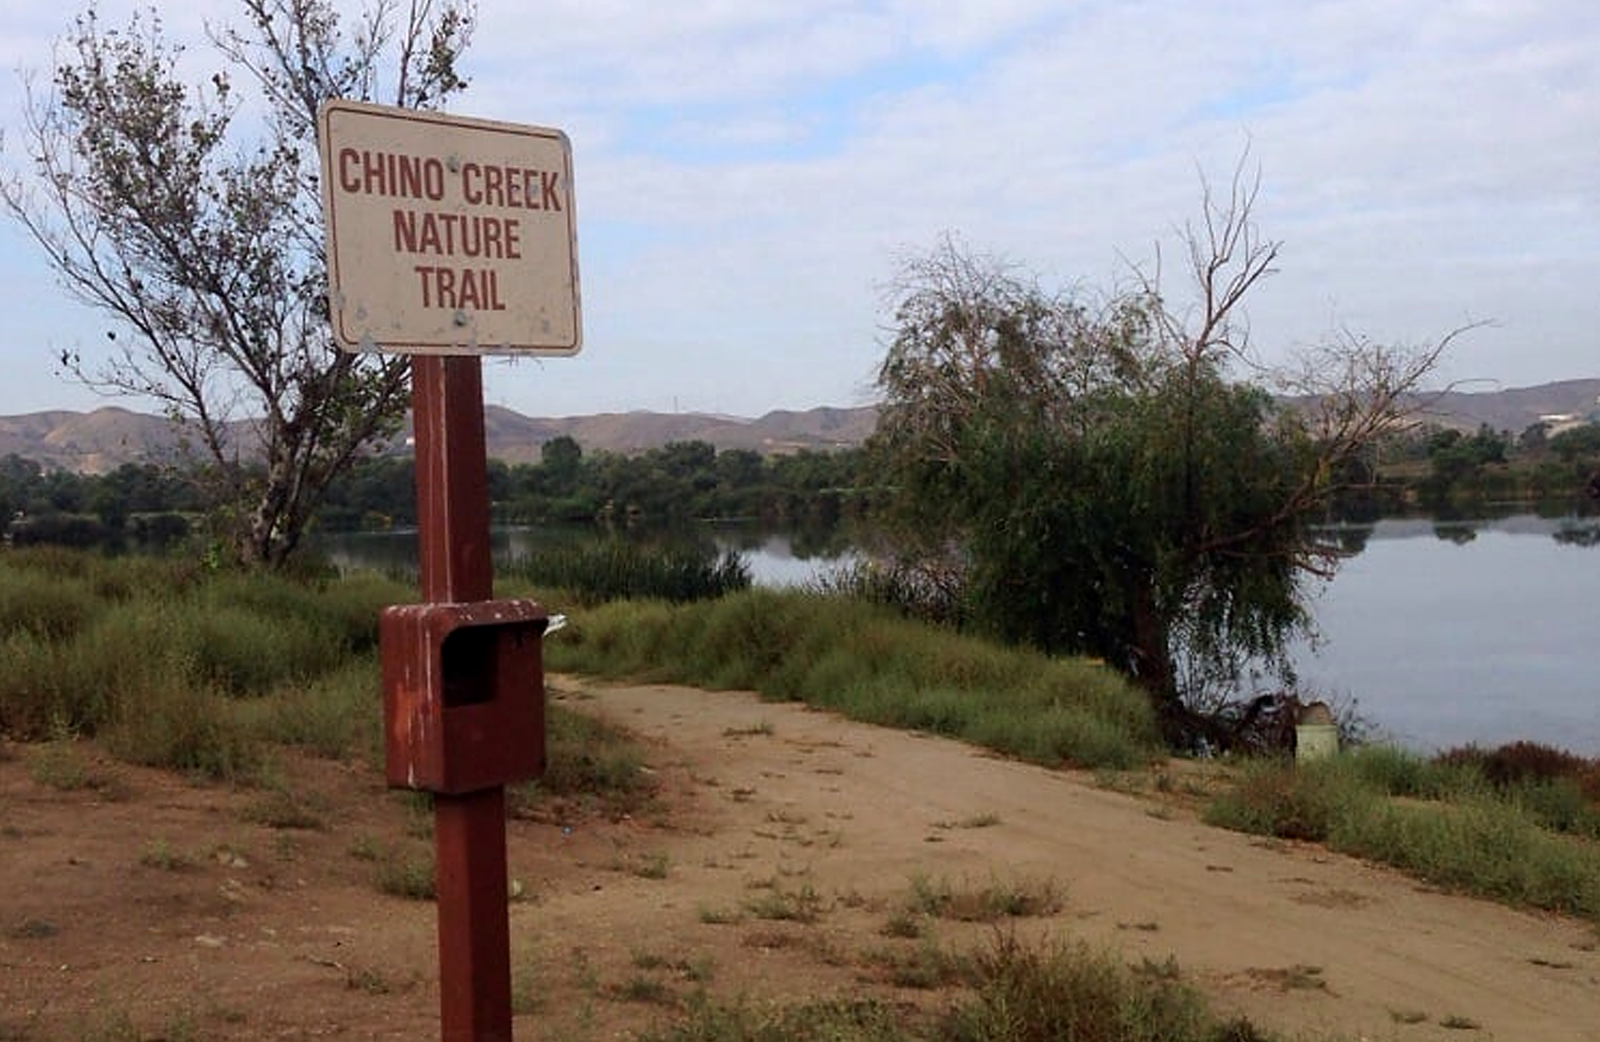 A sign that reads Chino Creek Nature Trail sits alongside the creek in a grassy area.